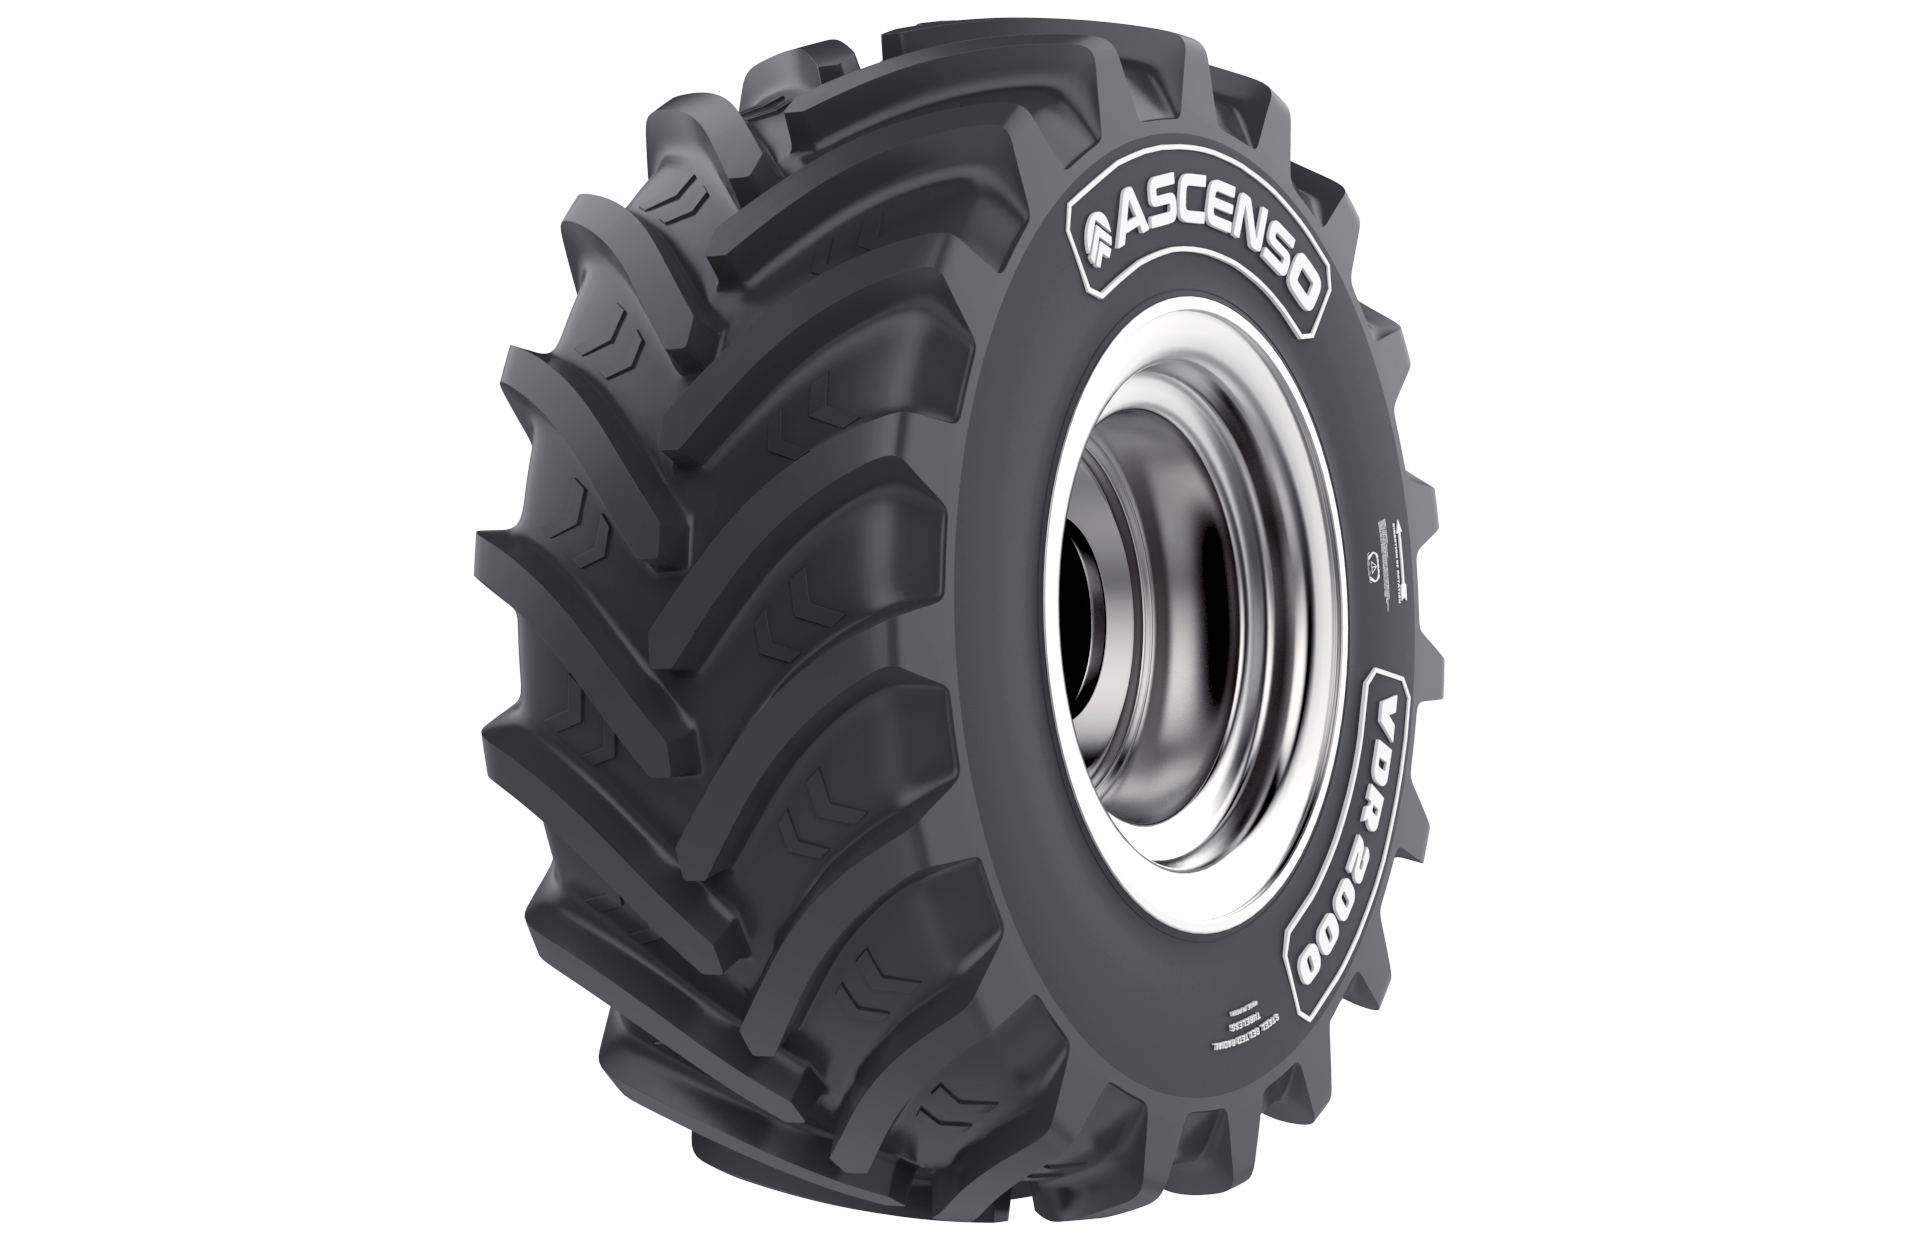 ASCENSO VF 800/70R38 NRO 187D R1-W TL VDR2000 STEEL BELTED / STUBBLE GUARD